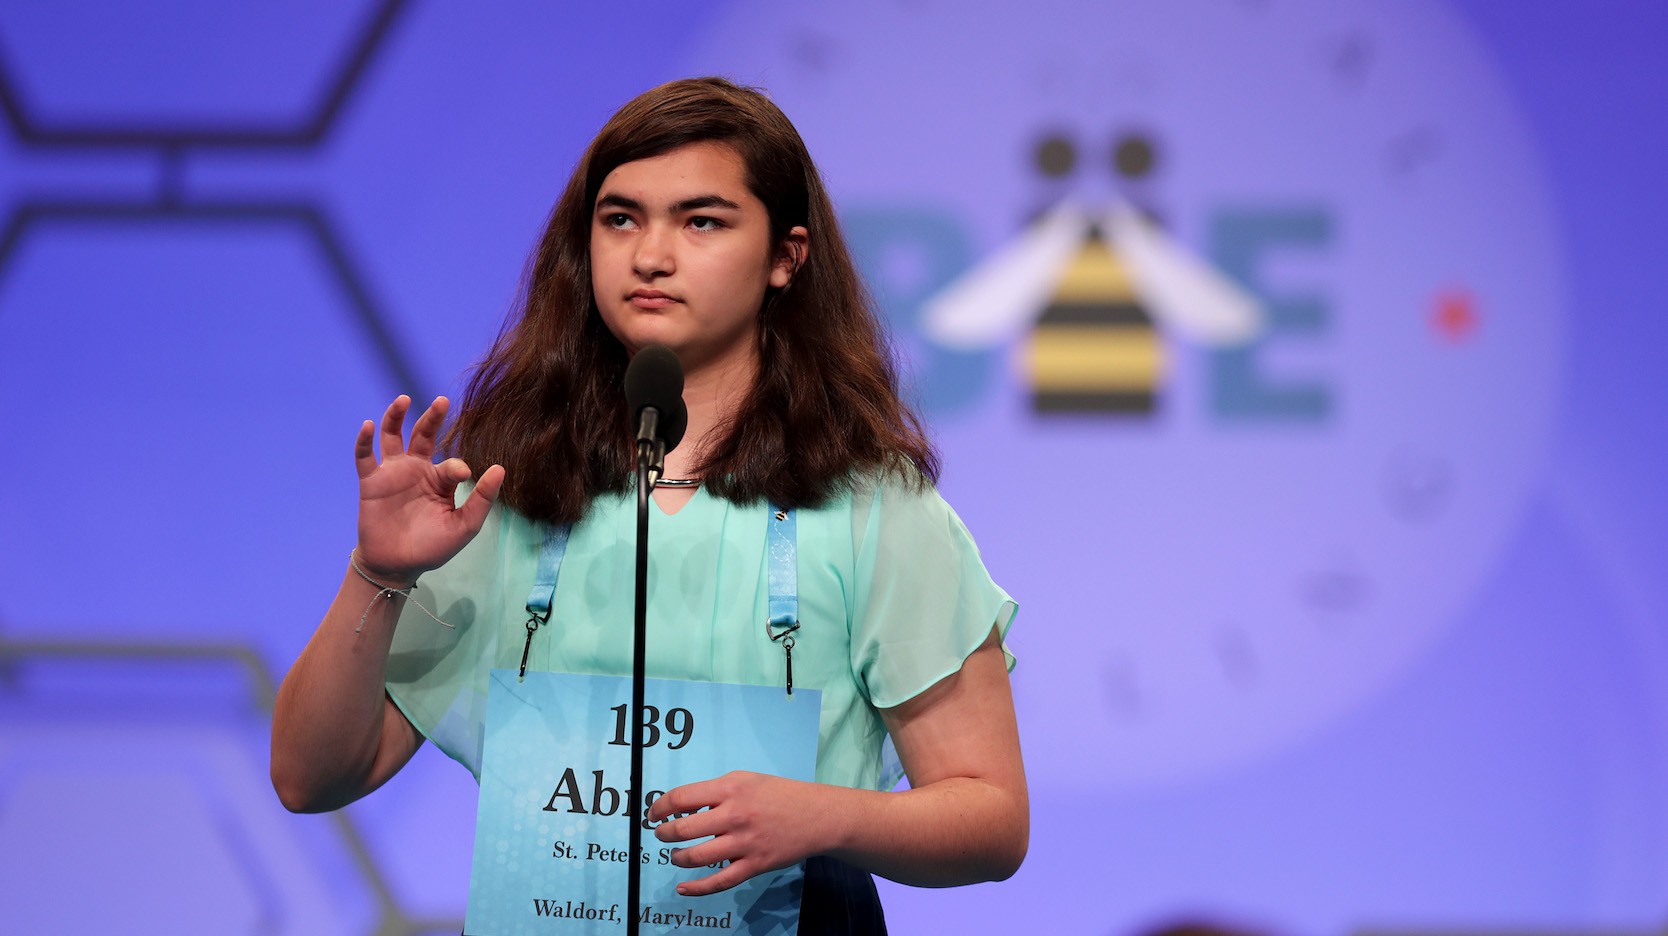 Answer from Spelling Bee contestant